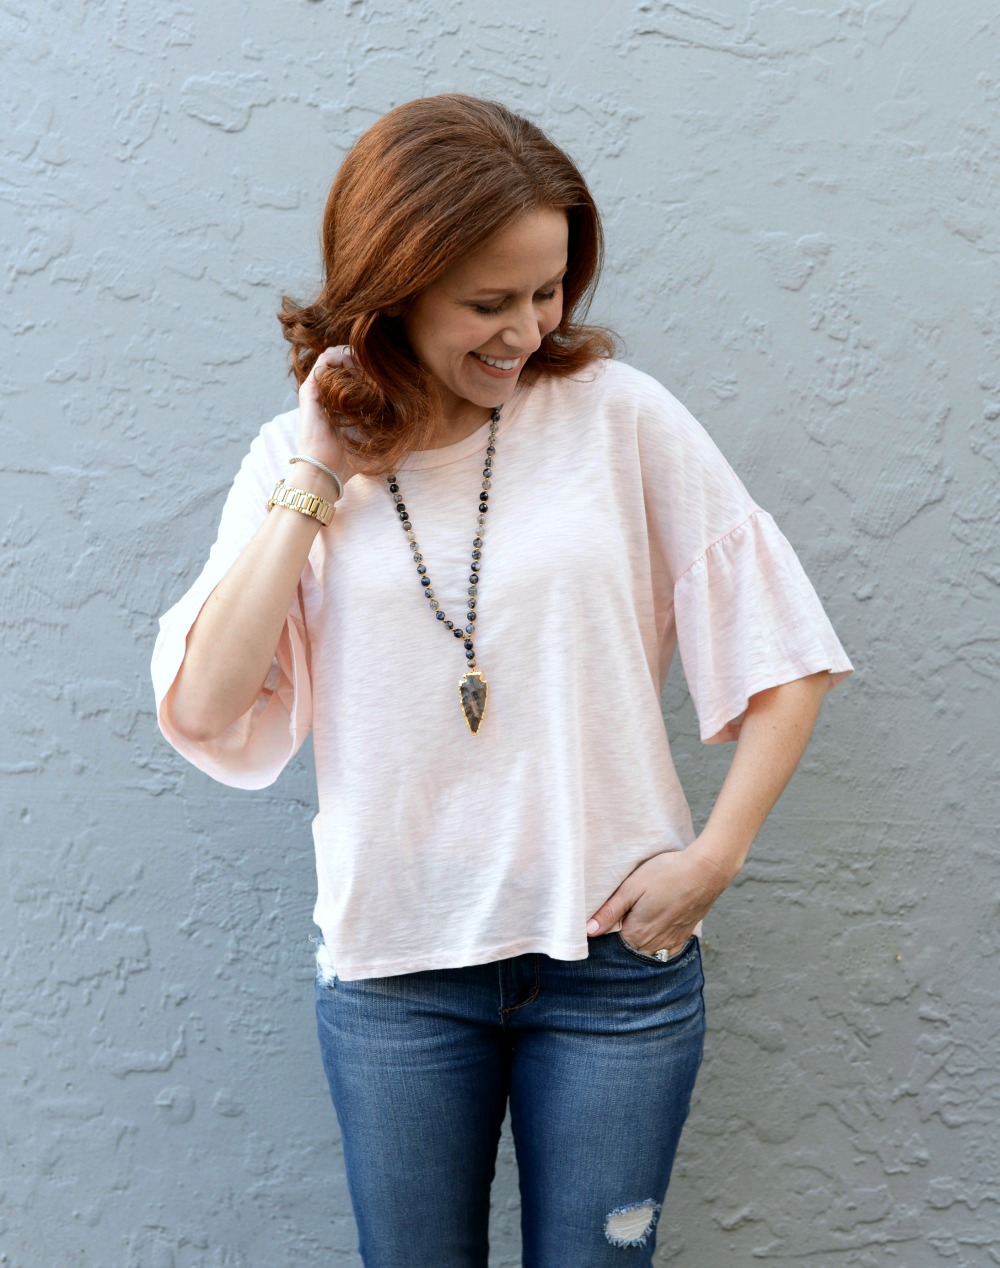 The Modern Savvy shares three tshirts you need in your closet now. Click thru to see the looks.